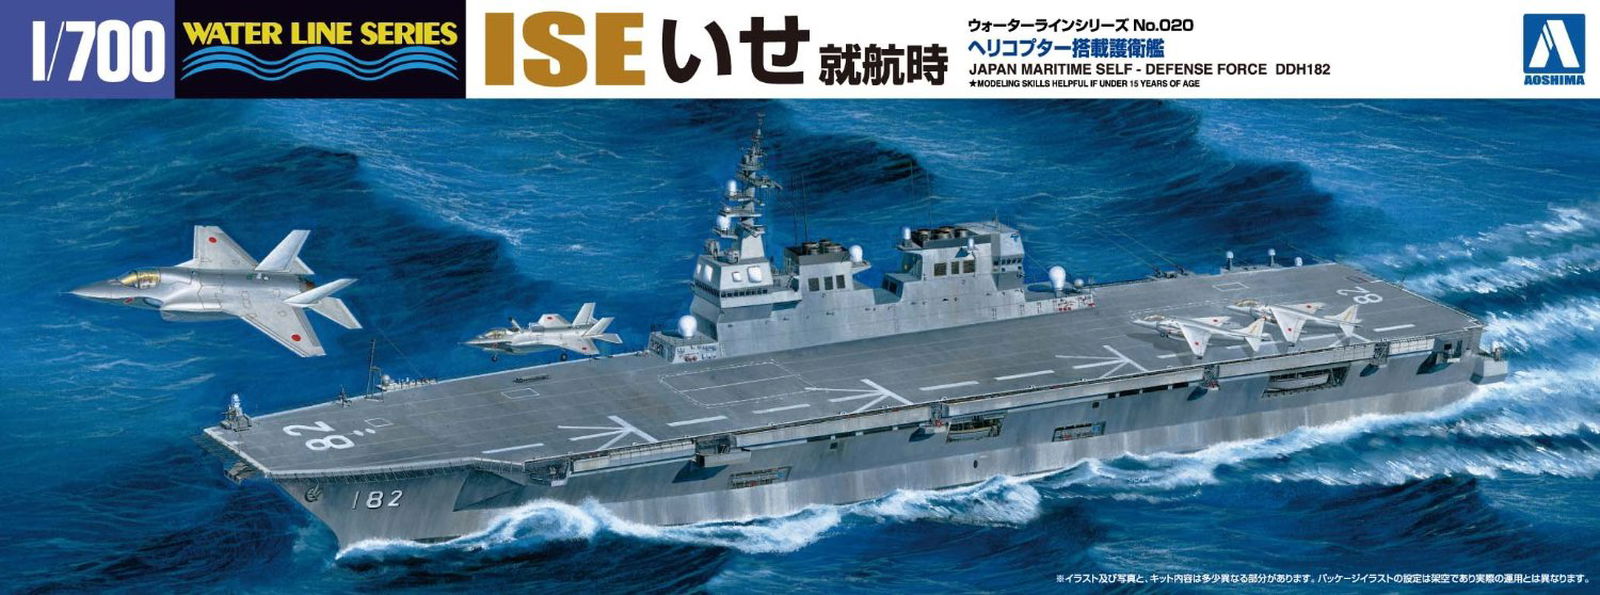 Aoshima 1/700 MSDF Helicopter Equipped Defender Ise on duty - BanzaiHobby